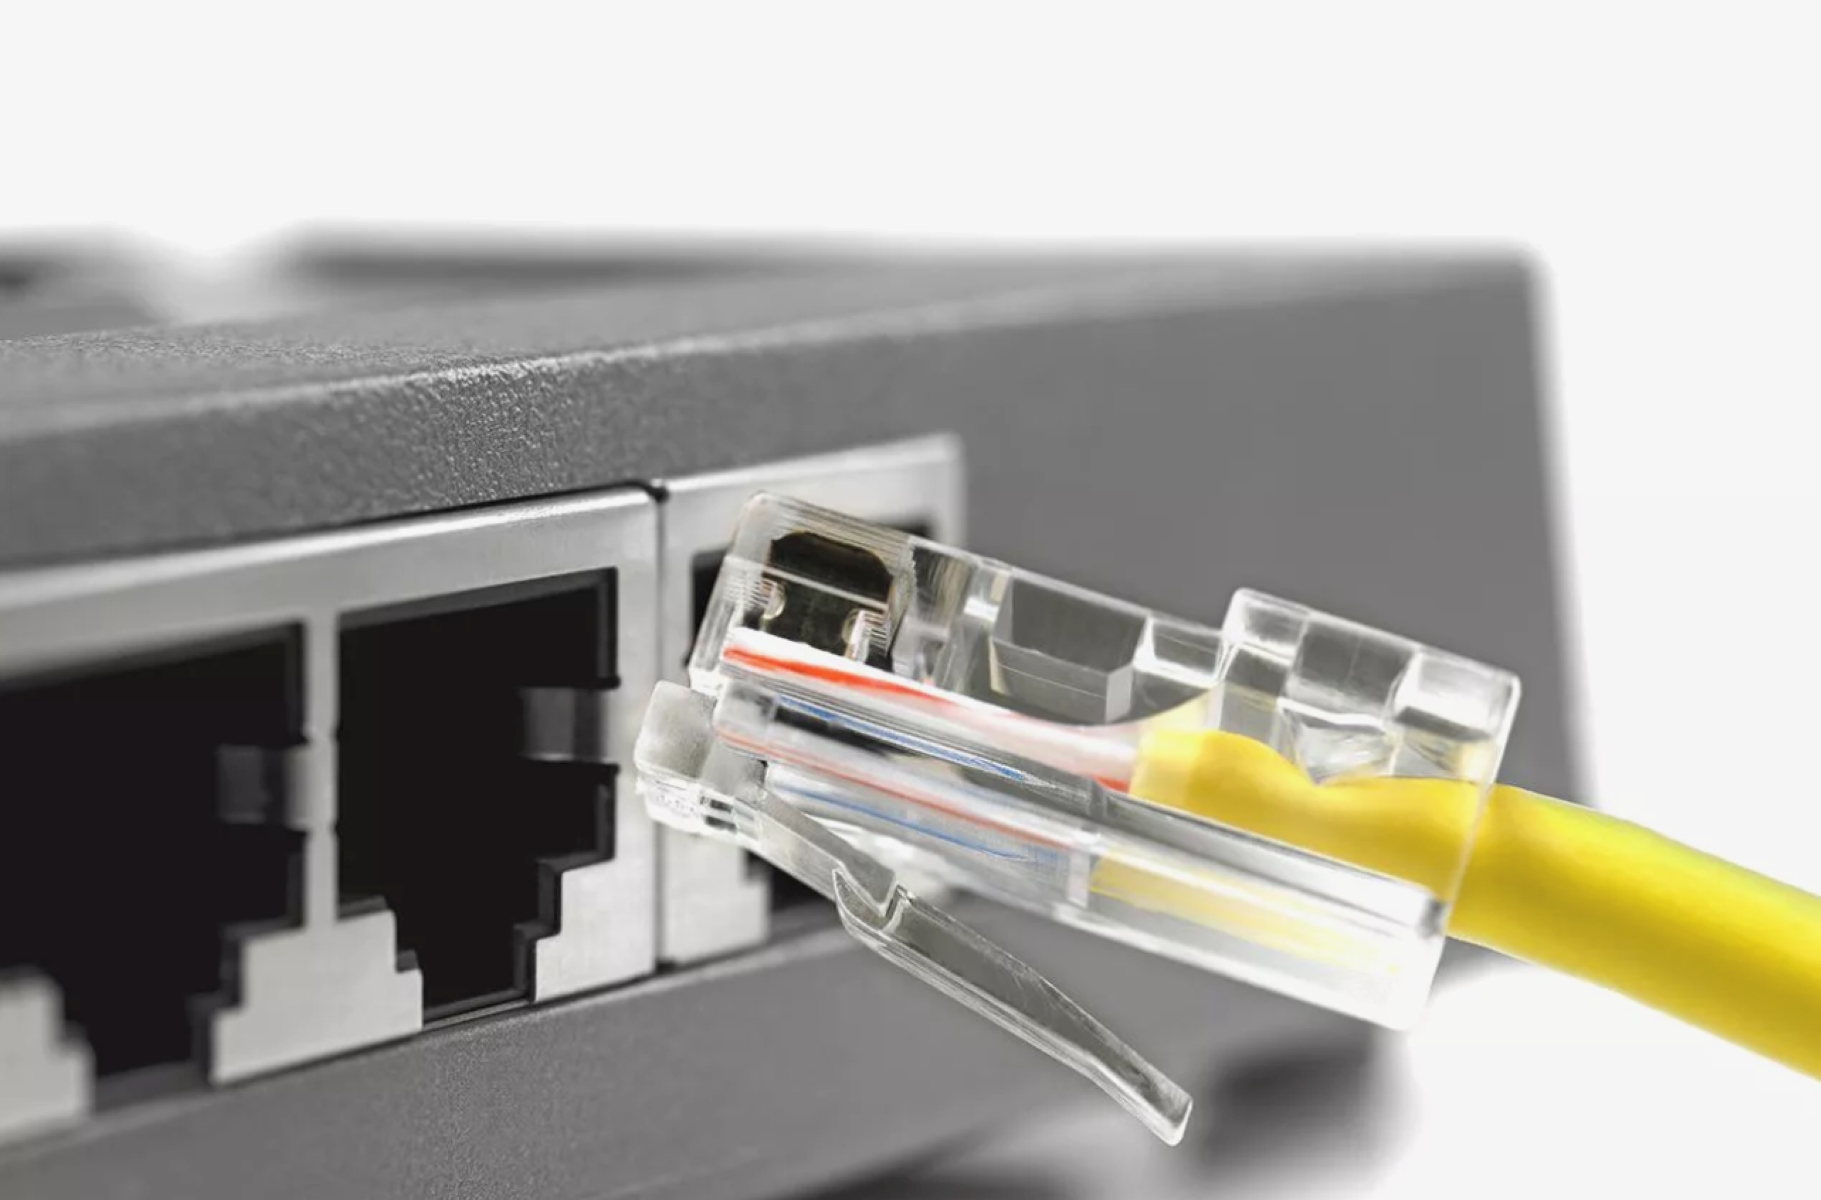 what-is-the-connector-called-on-a-network-cable-that-connects-to-an-ethernet-port